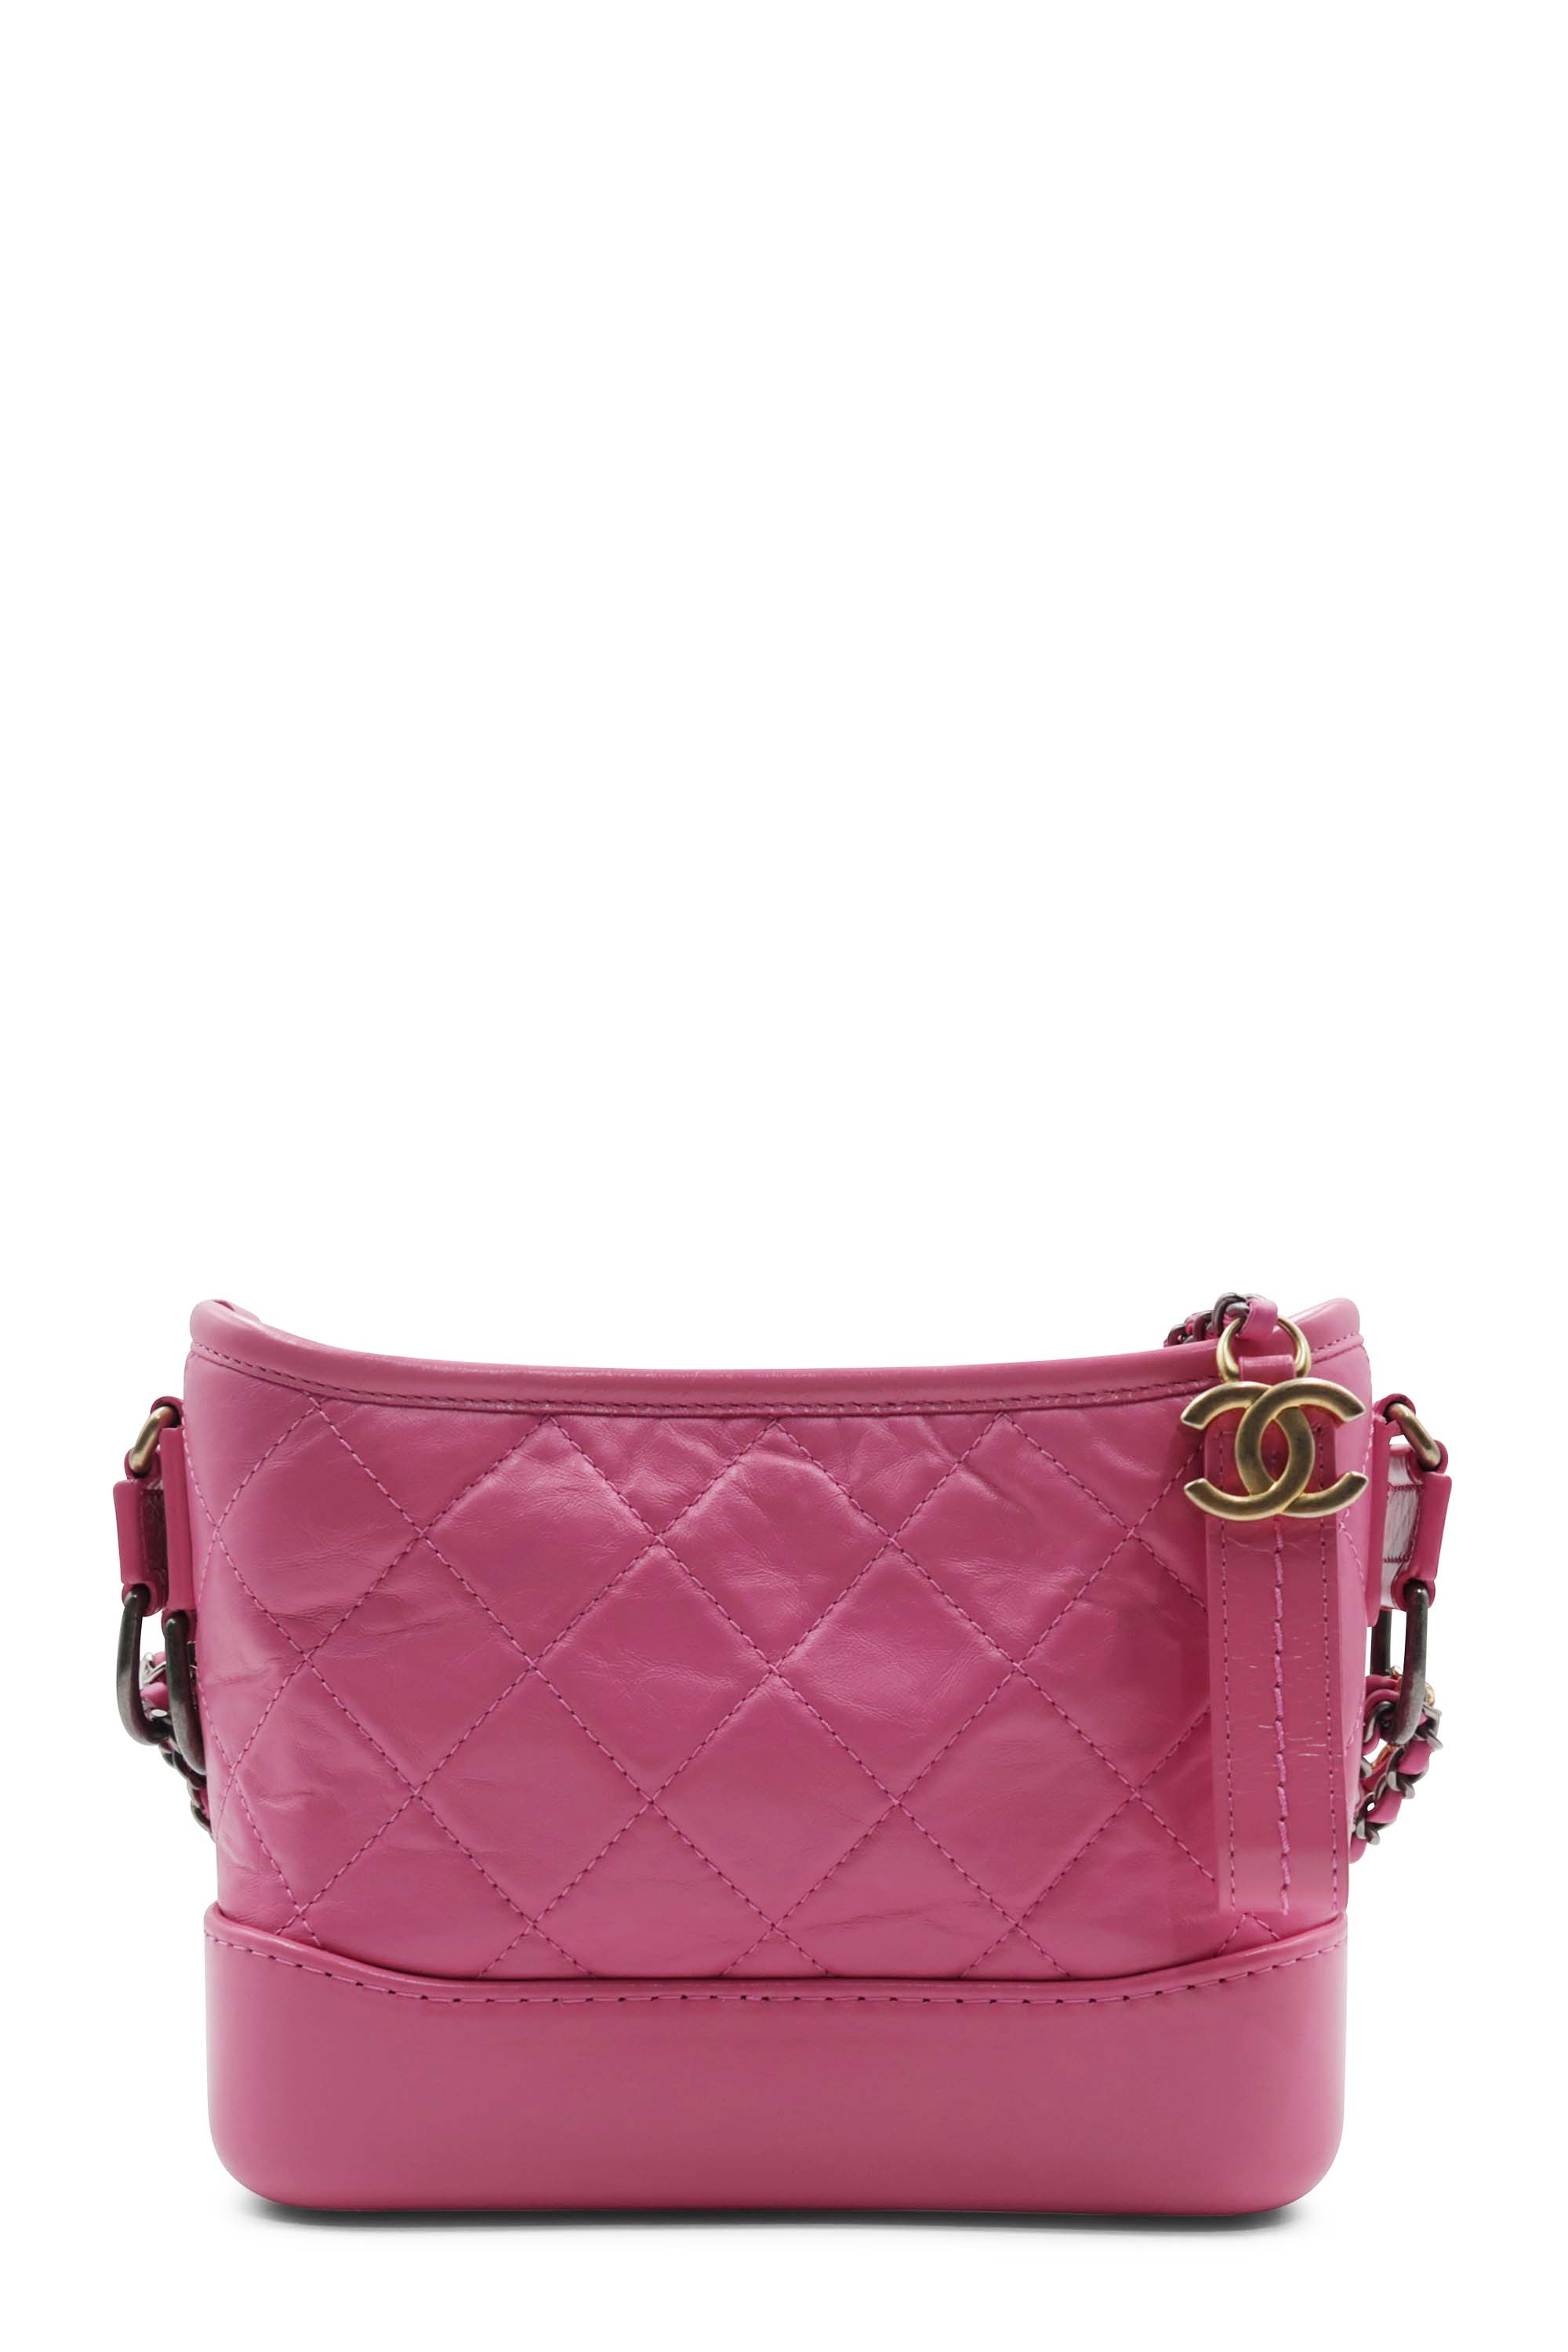 Chanel Pink Leather Gabrielle Small Hobo Bag Chanel